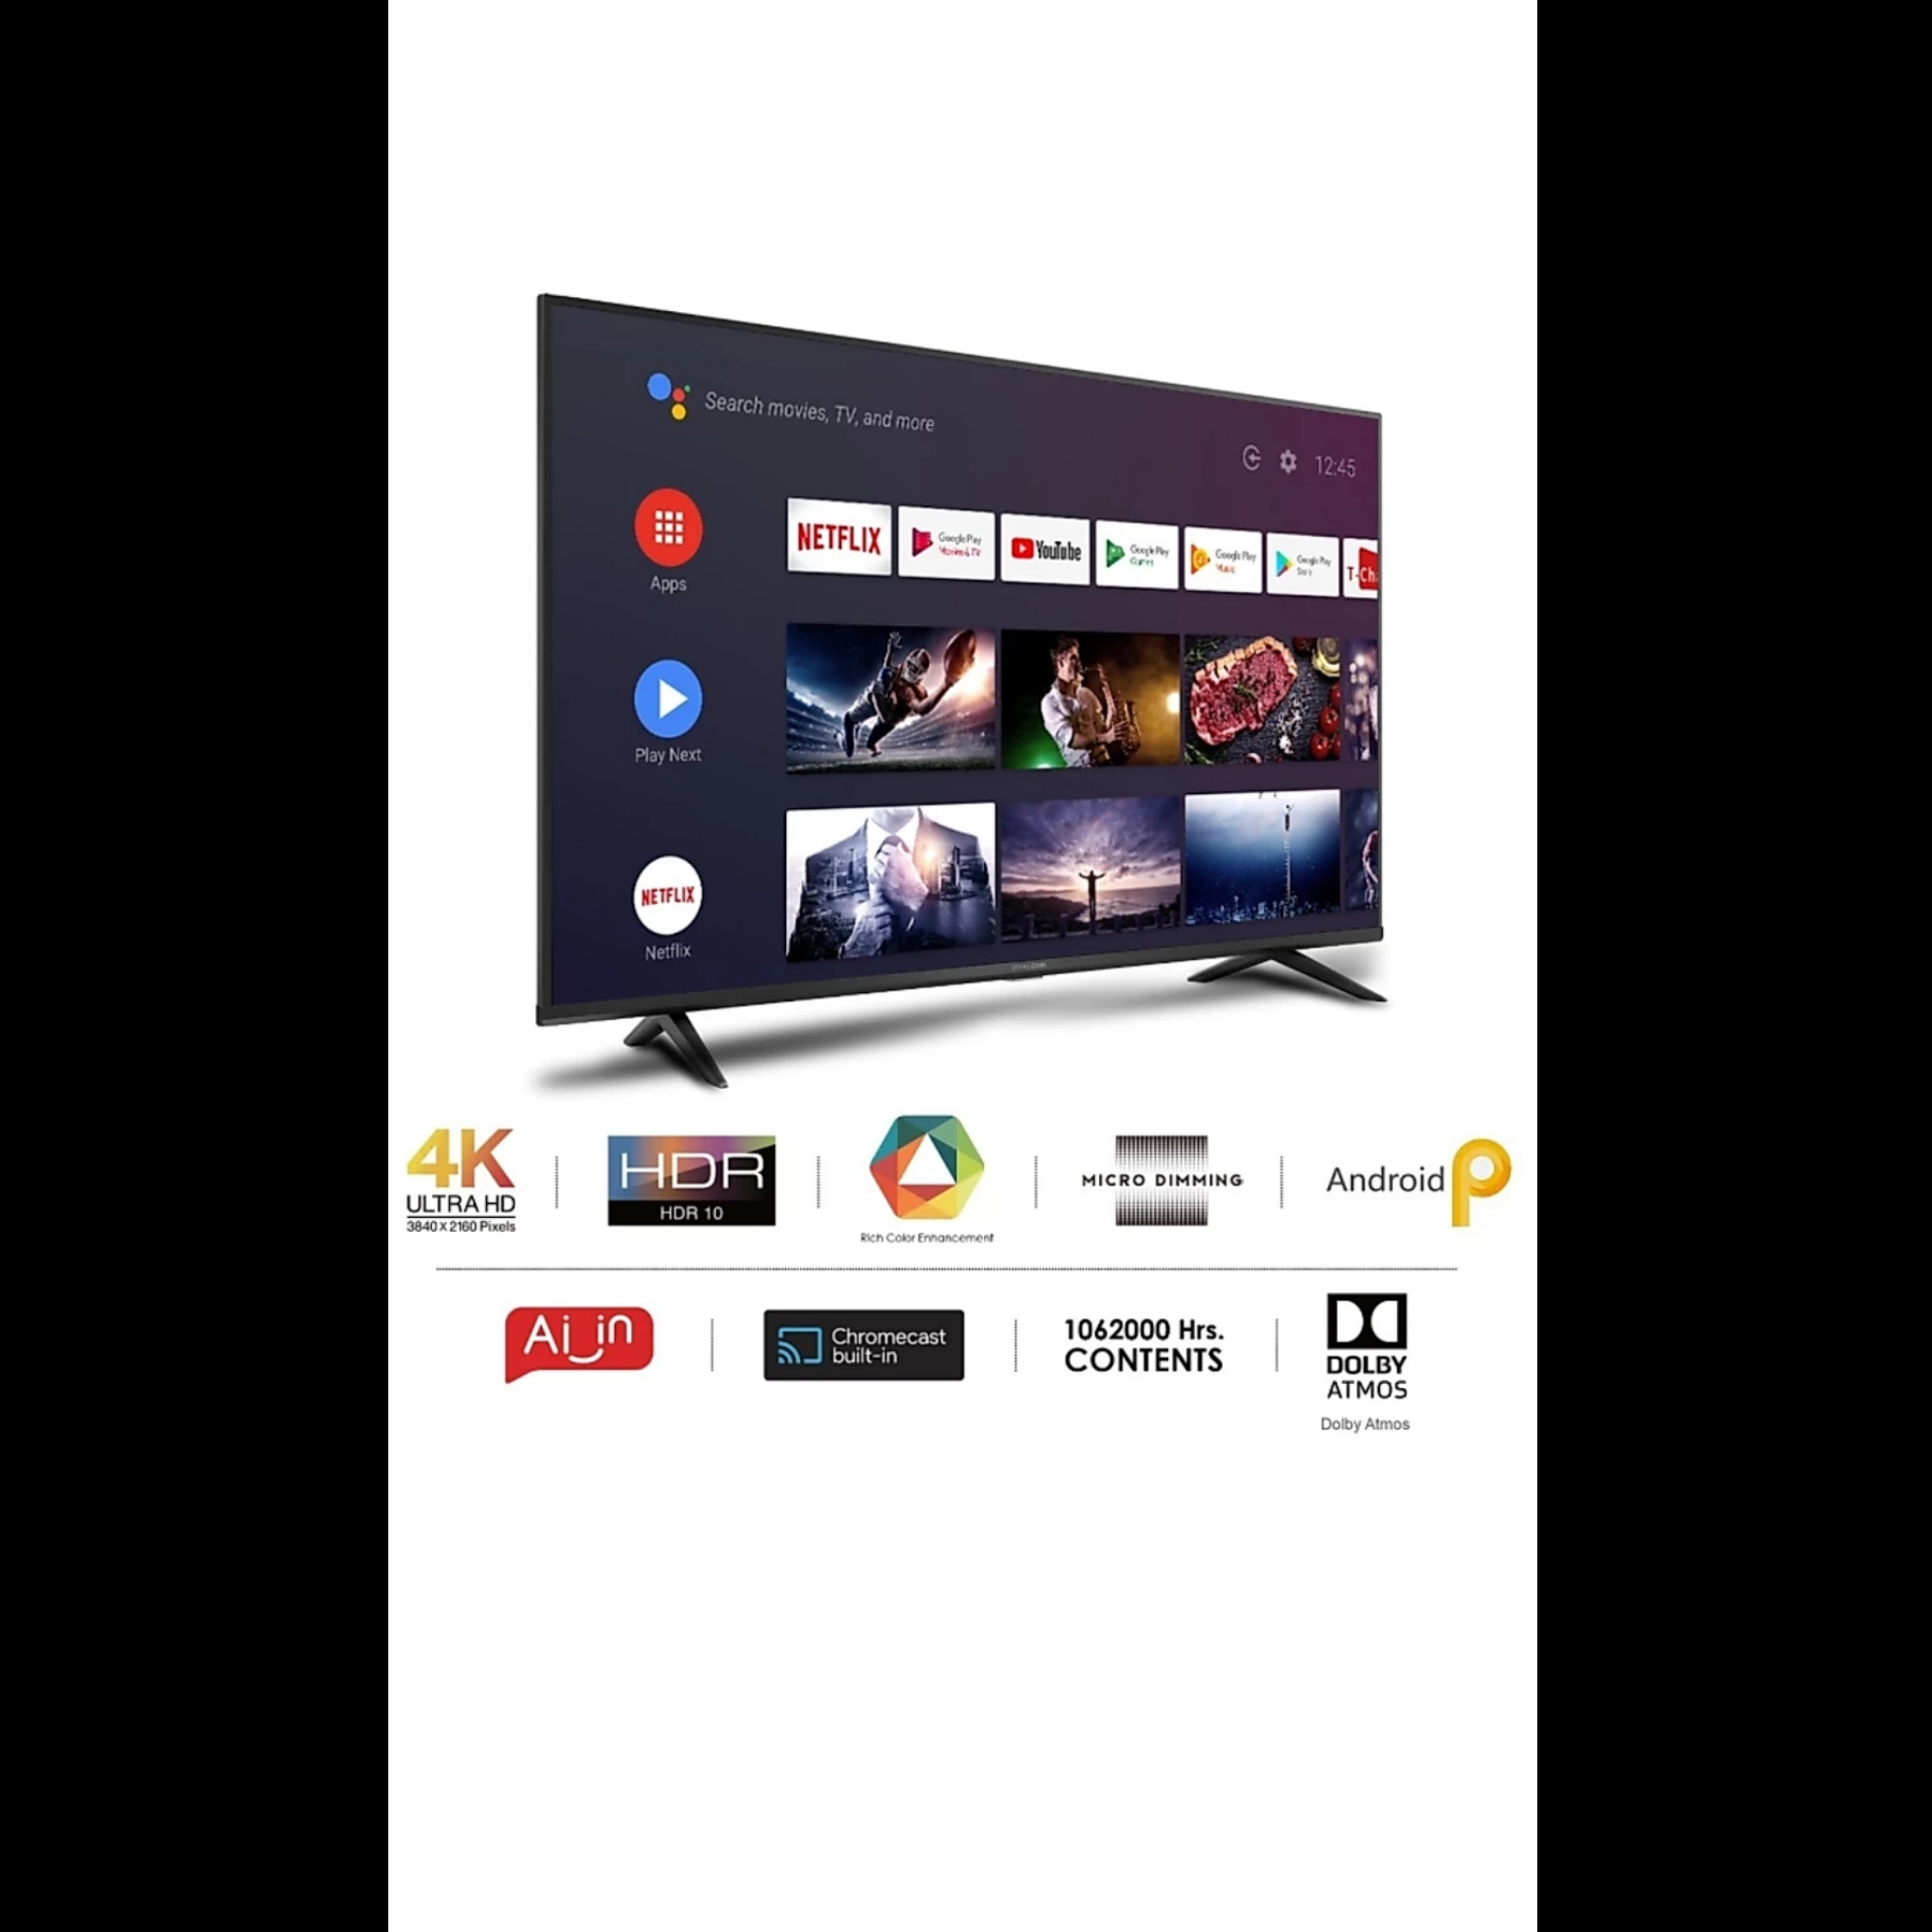 Iffalcon led by TCL (43 inch) ultra HD (4k) led smart Anroide tv